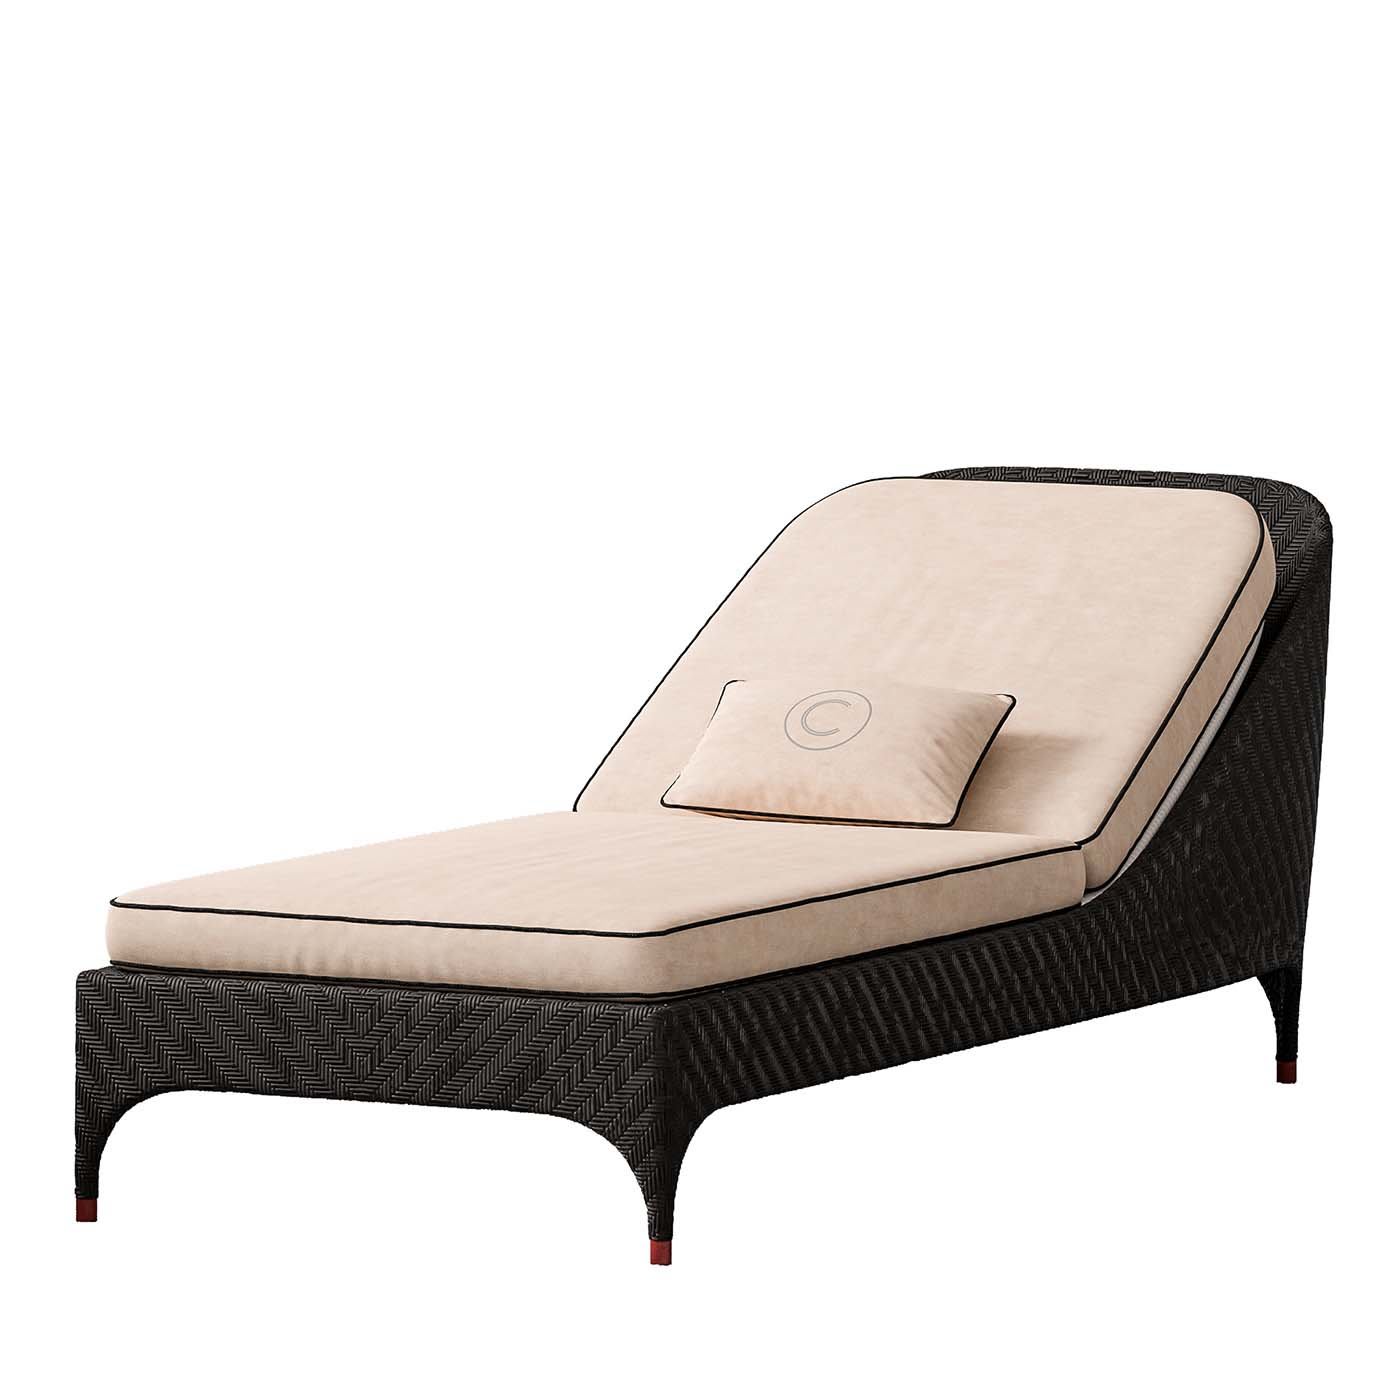 Black 1-Seater Sunbed with White Cushions - CPRN Homood